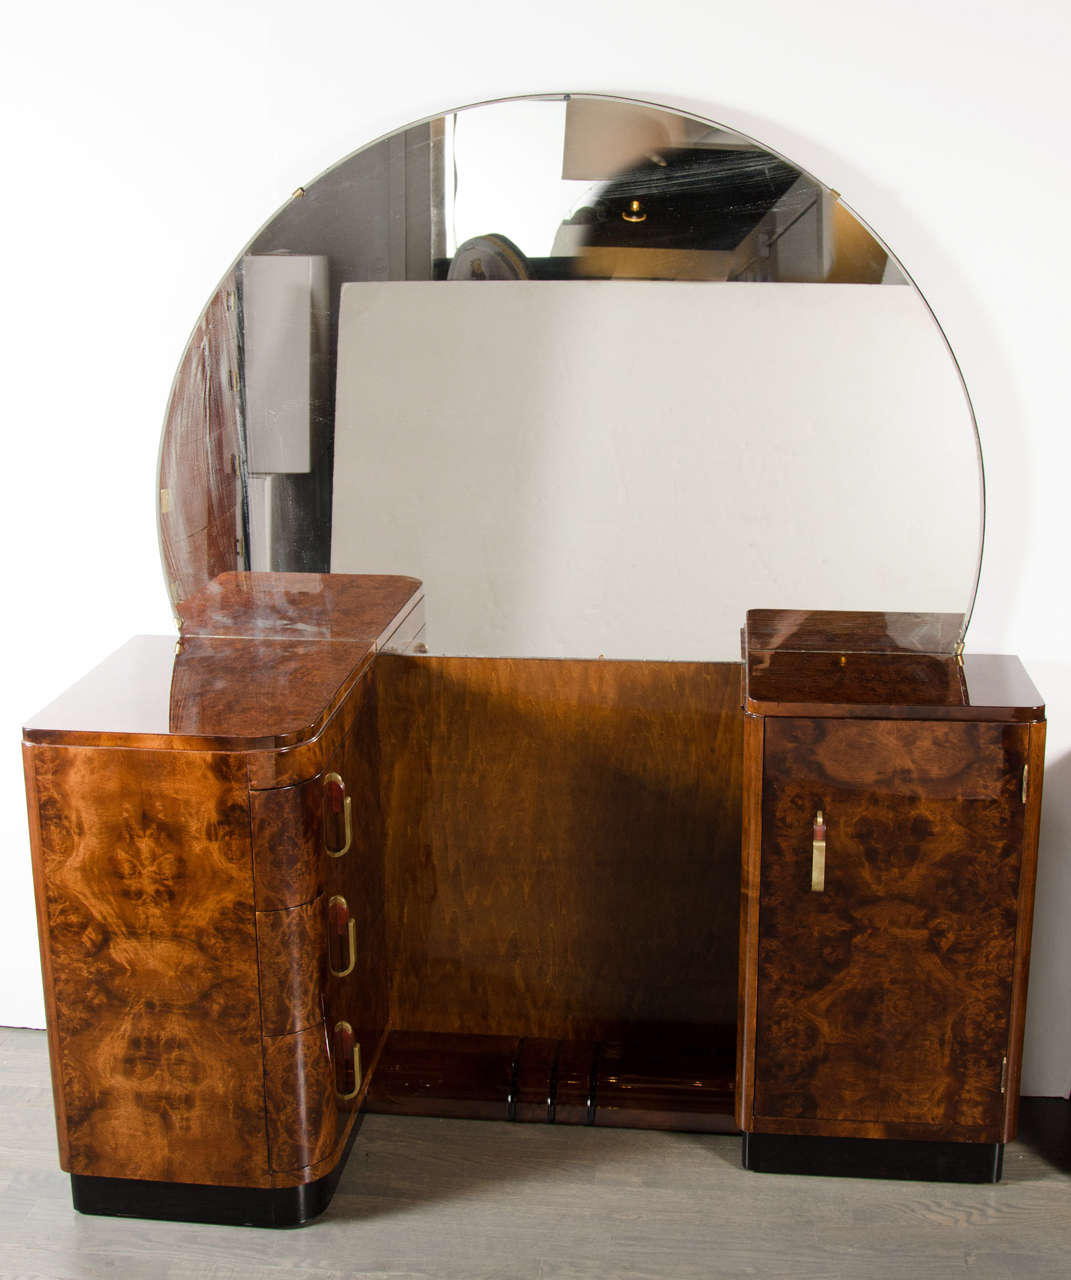 This  Art Deco Streamlined Vanity in the manner of Donald Deskey features a large rear mounted circular mirror, a seating nook with foot rest with stylized Art Deco detailing and a cabinet opposite a set of three drawers. It has brass and bakelite